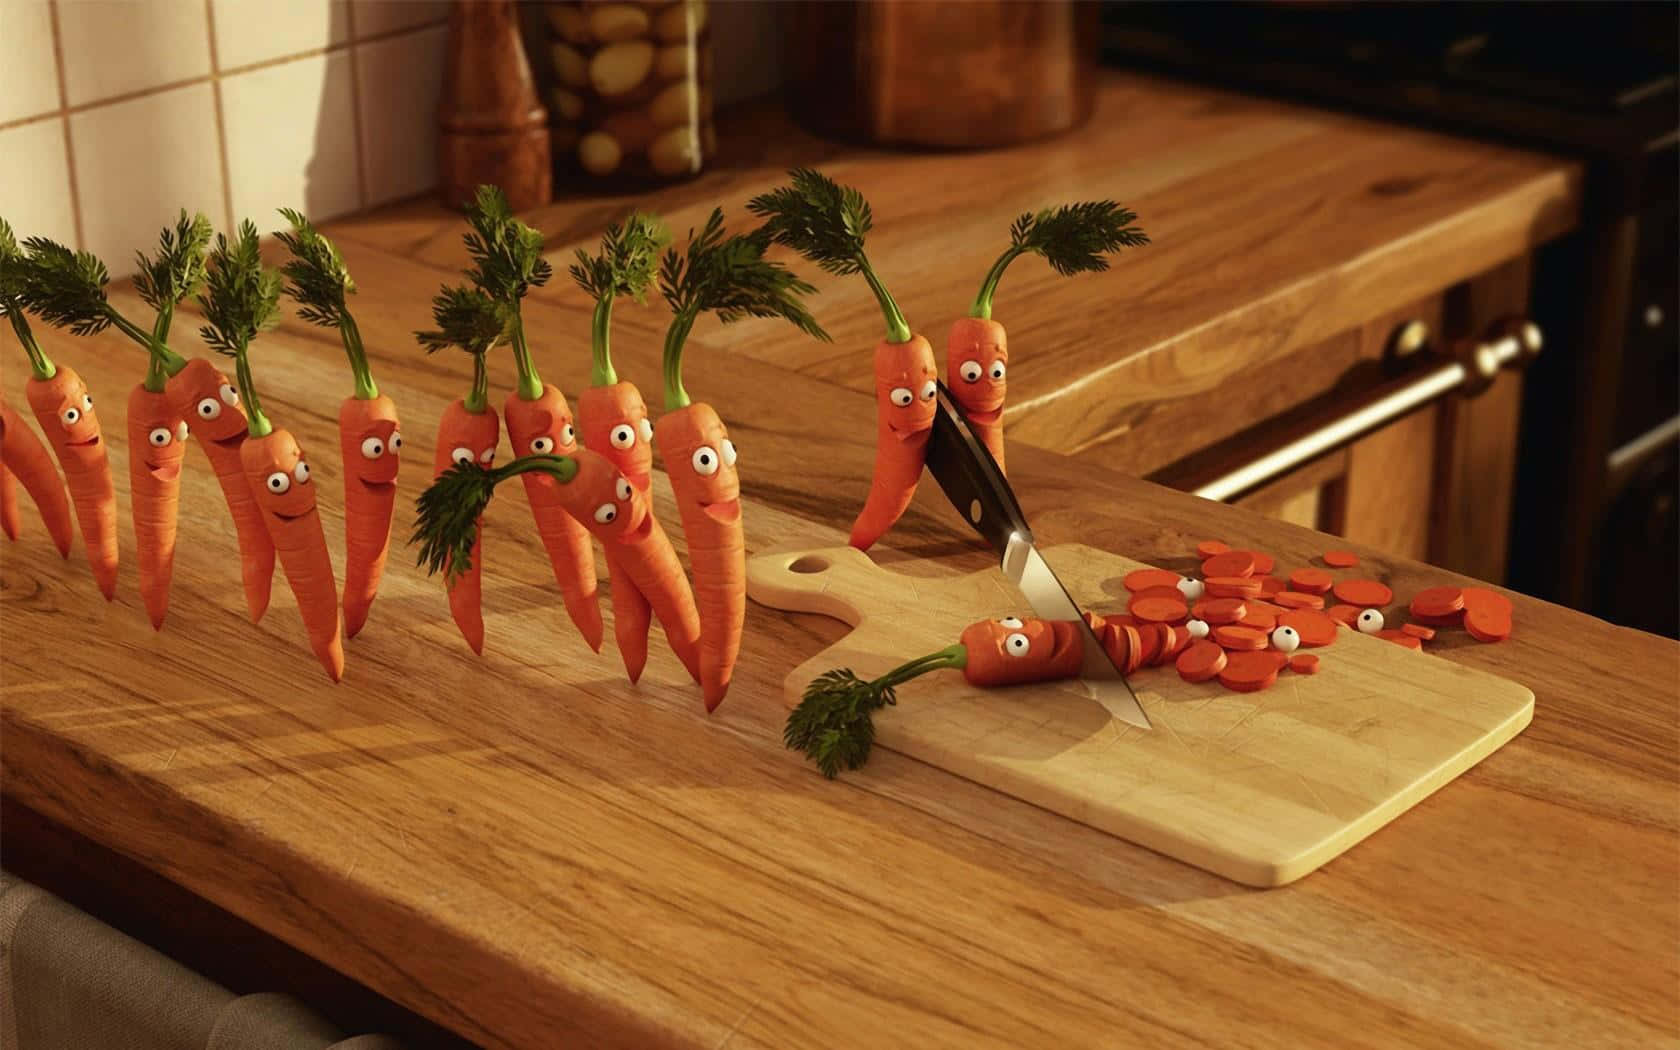 "Freshly harvested Carrot: A Sweet and Nutritious Vegetable for Your Health!"